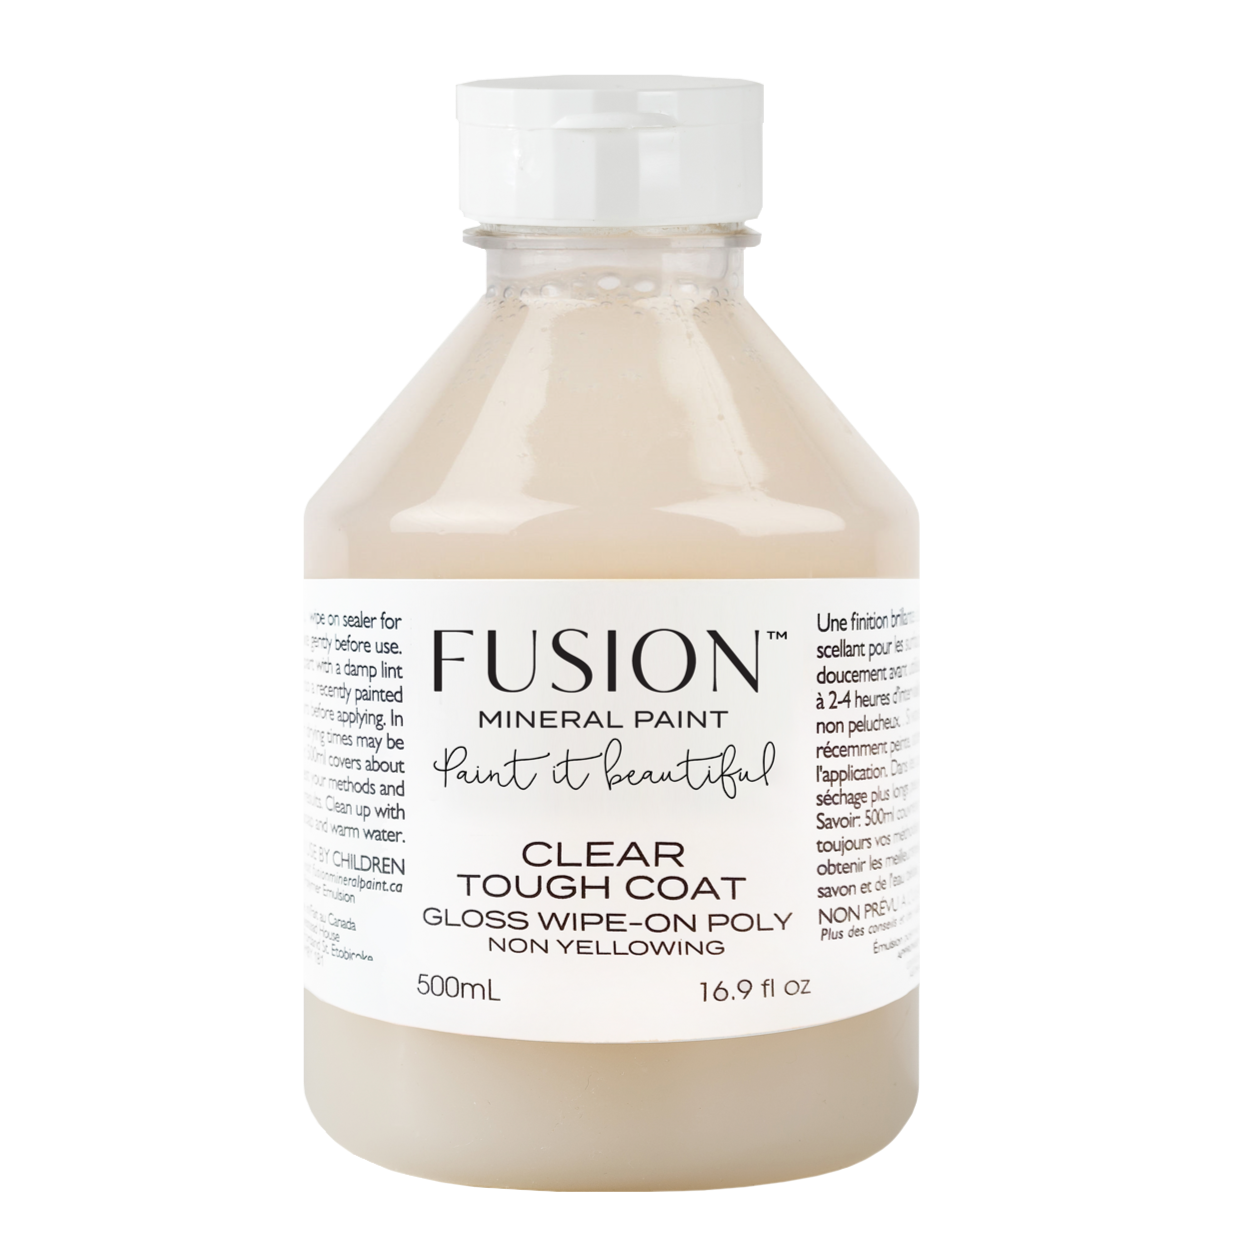 Clear Tough Coat Wipe-On Poly *GLOSS* - Fusion Mineral Paint